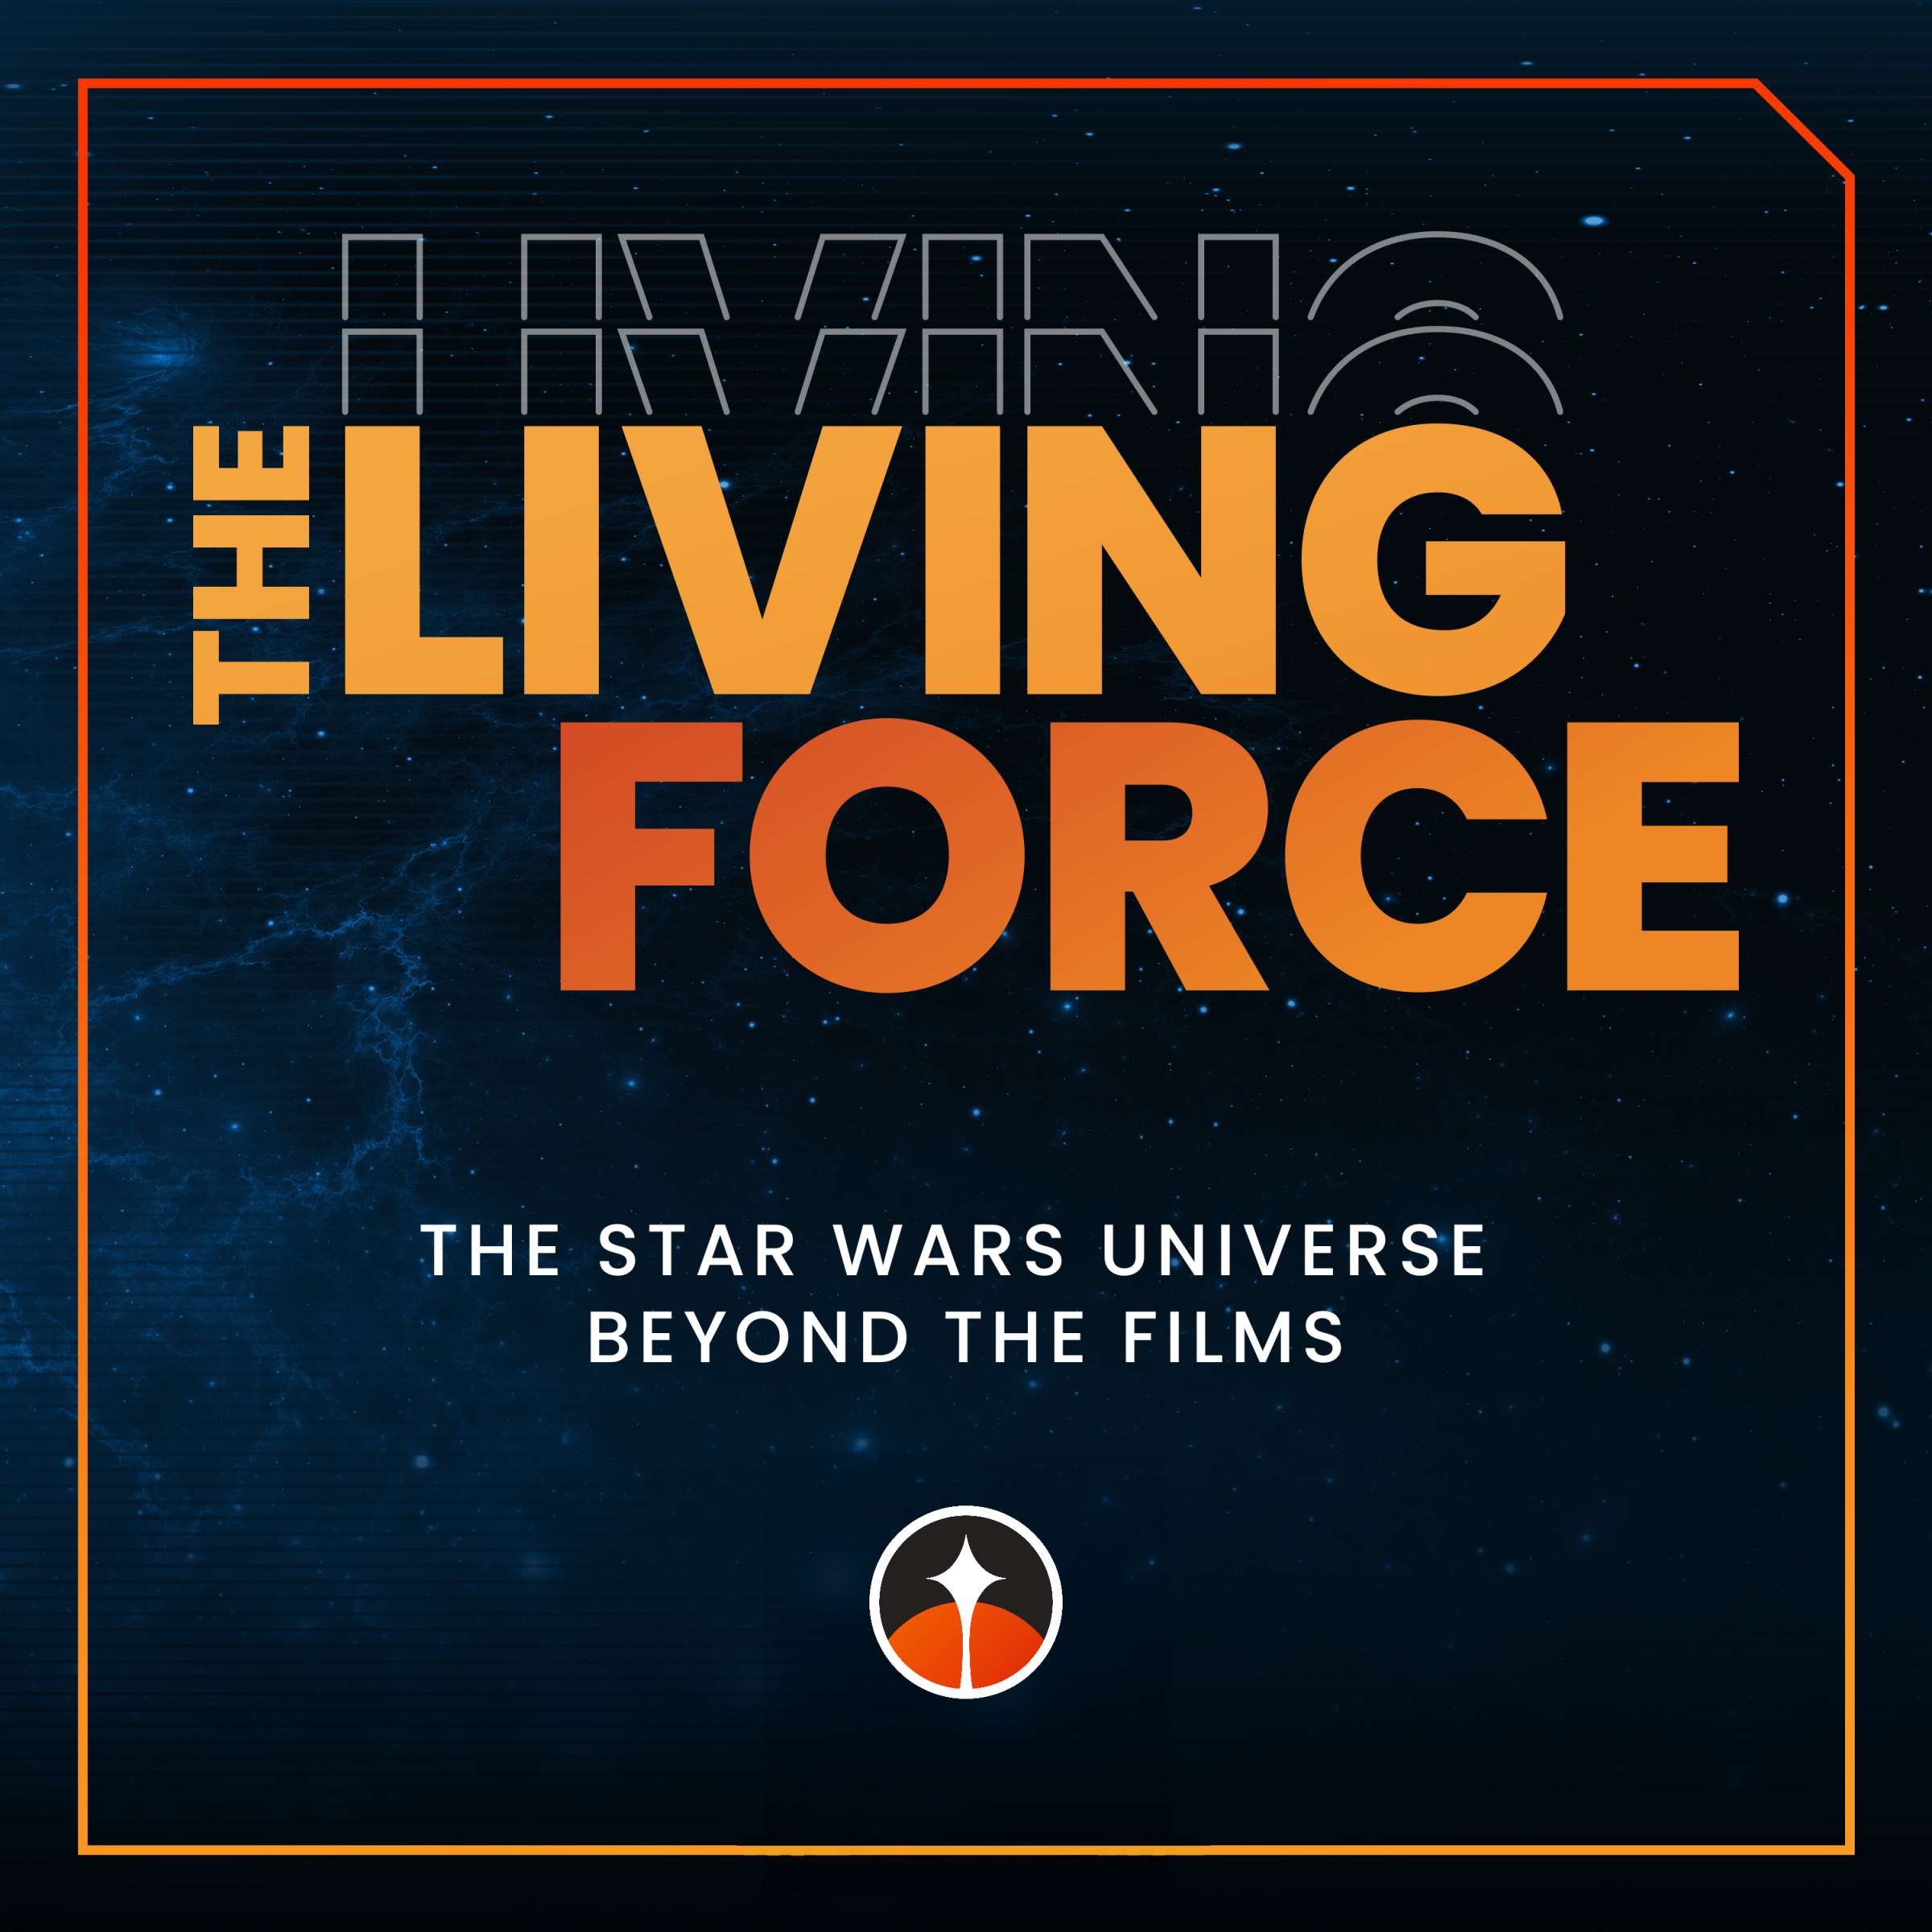 The Living Force